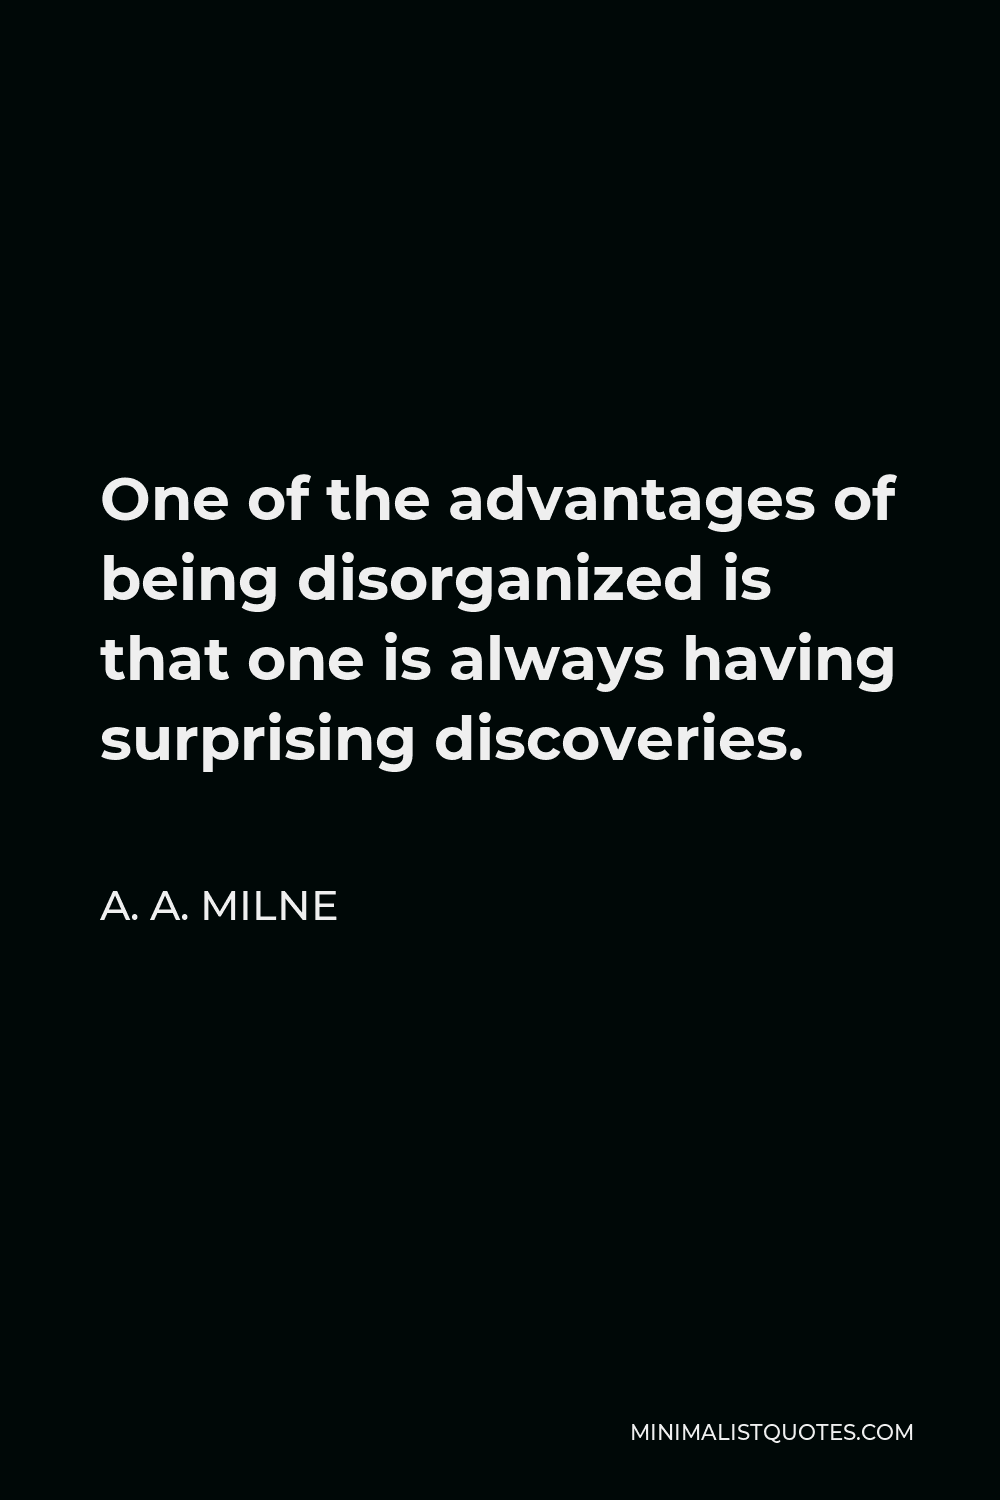 A. A. Milne Quote - One of the advantages of being disorganized is that one is always having surprising discoveries.